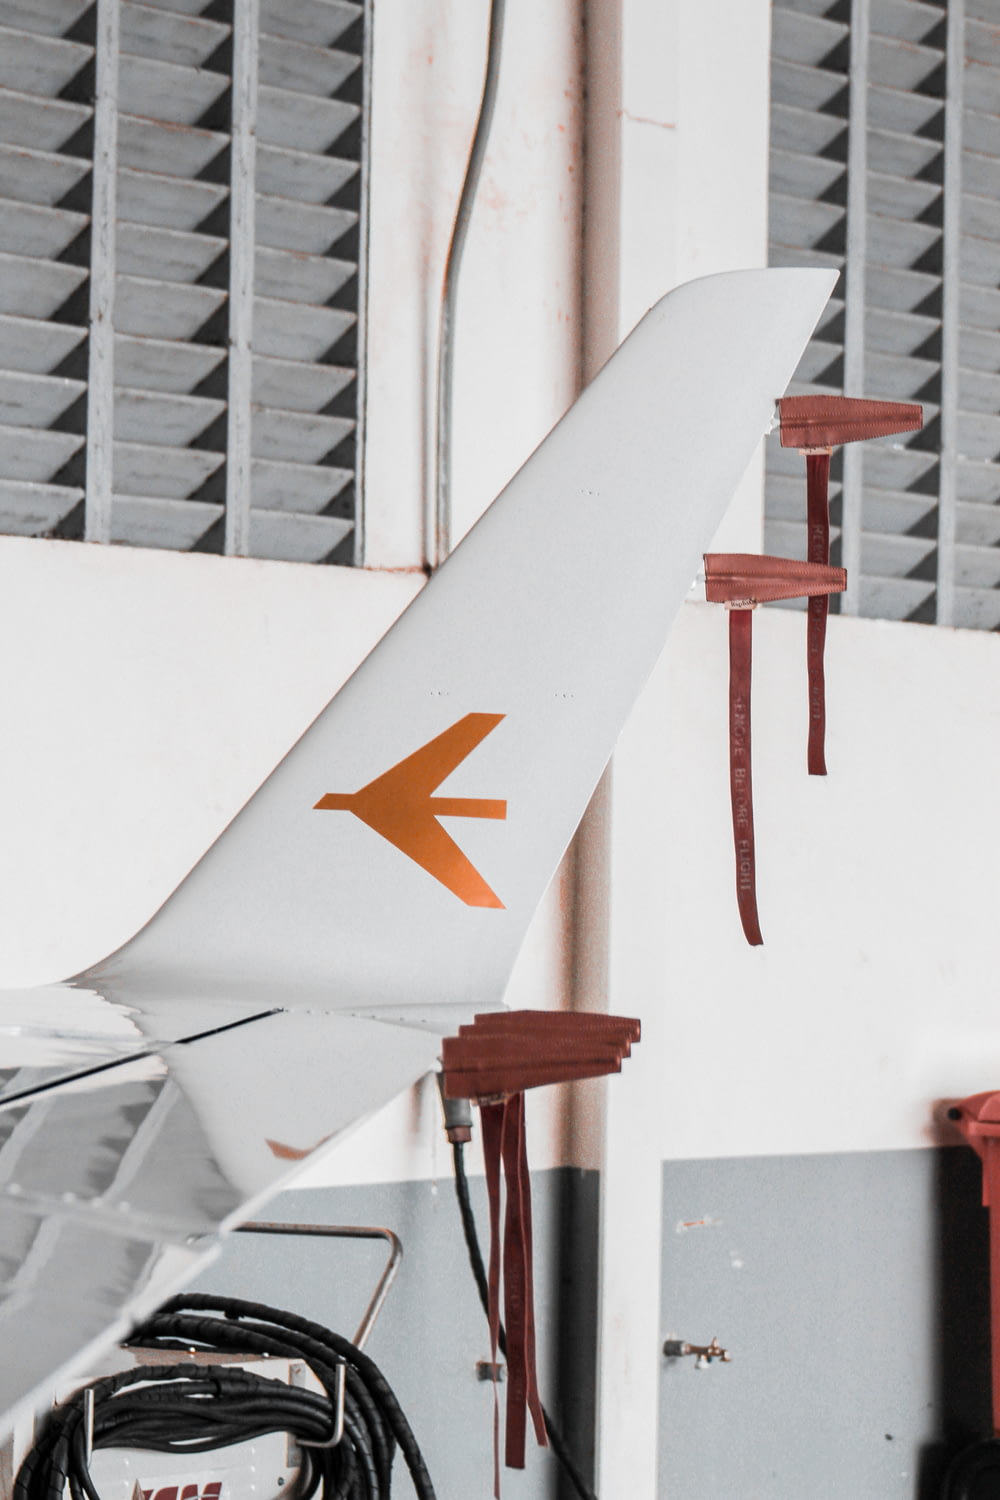 a white airplane with an orange arrow painted on it